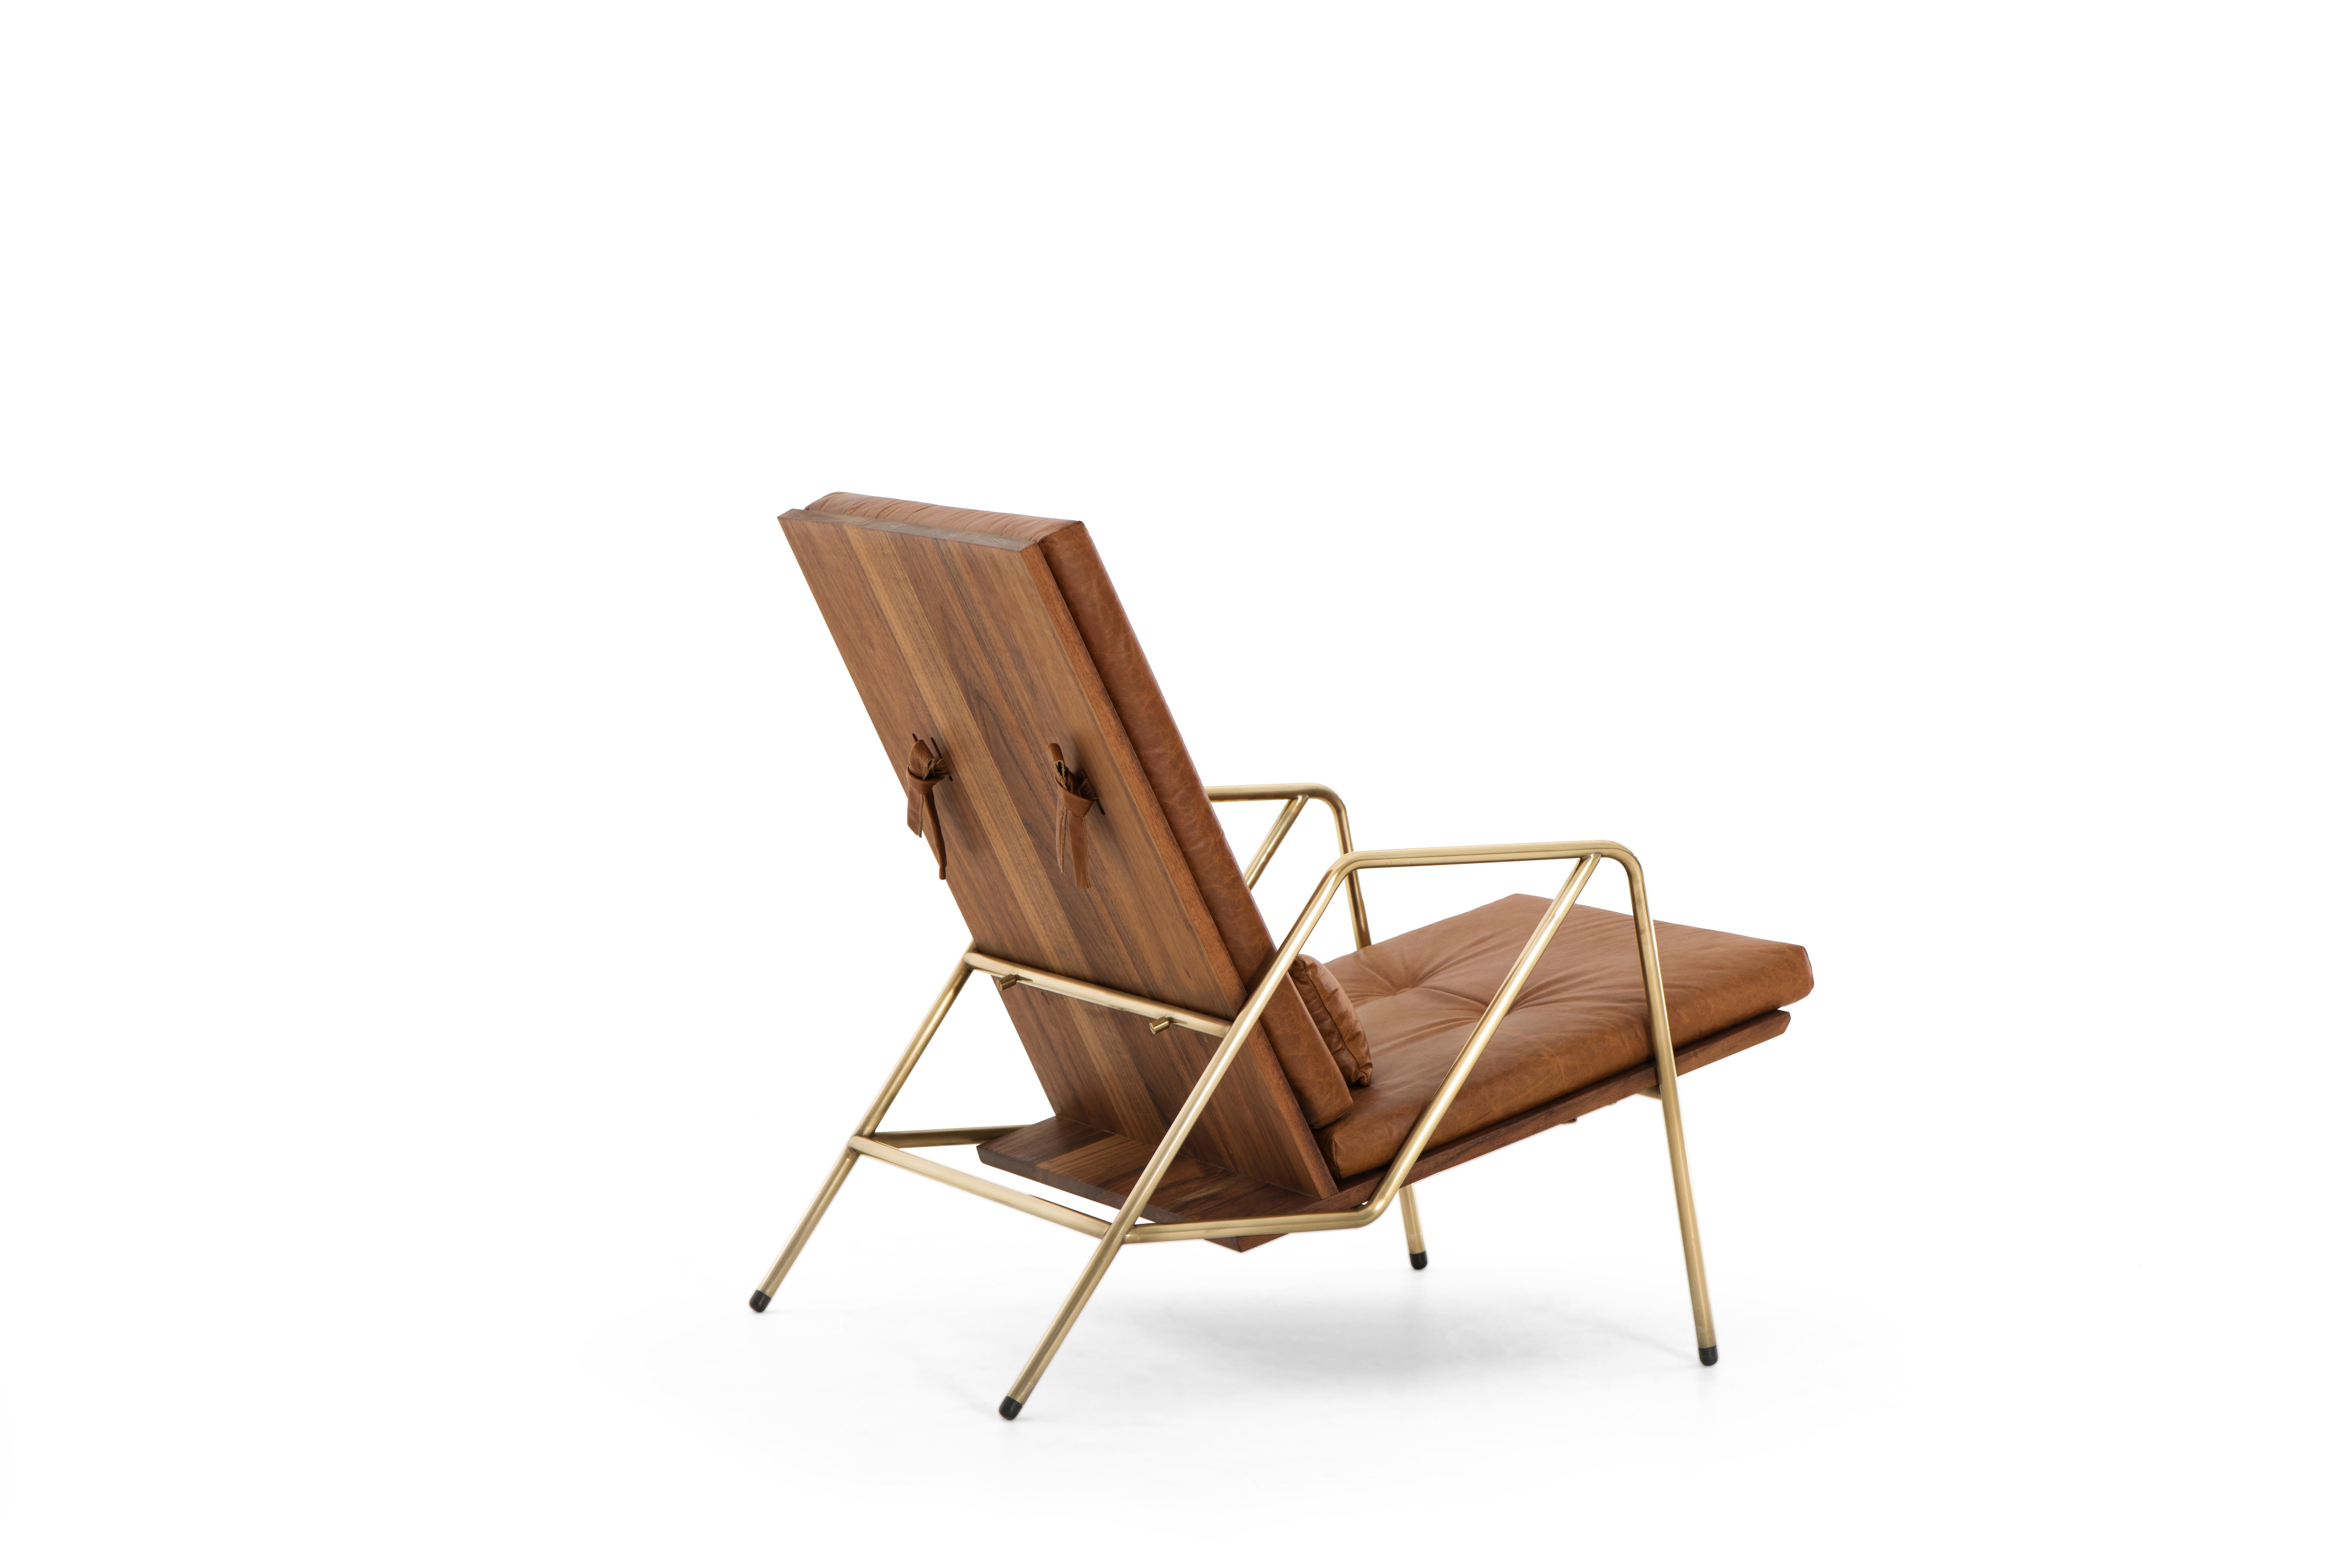 This exceptional piece showcases the highest quality materials and exquisite design details.

The lounge chair features sleek metal lines that elegantly trace a simple yet captivating structure. These lines seamlessly transition and meet the solid